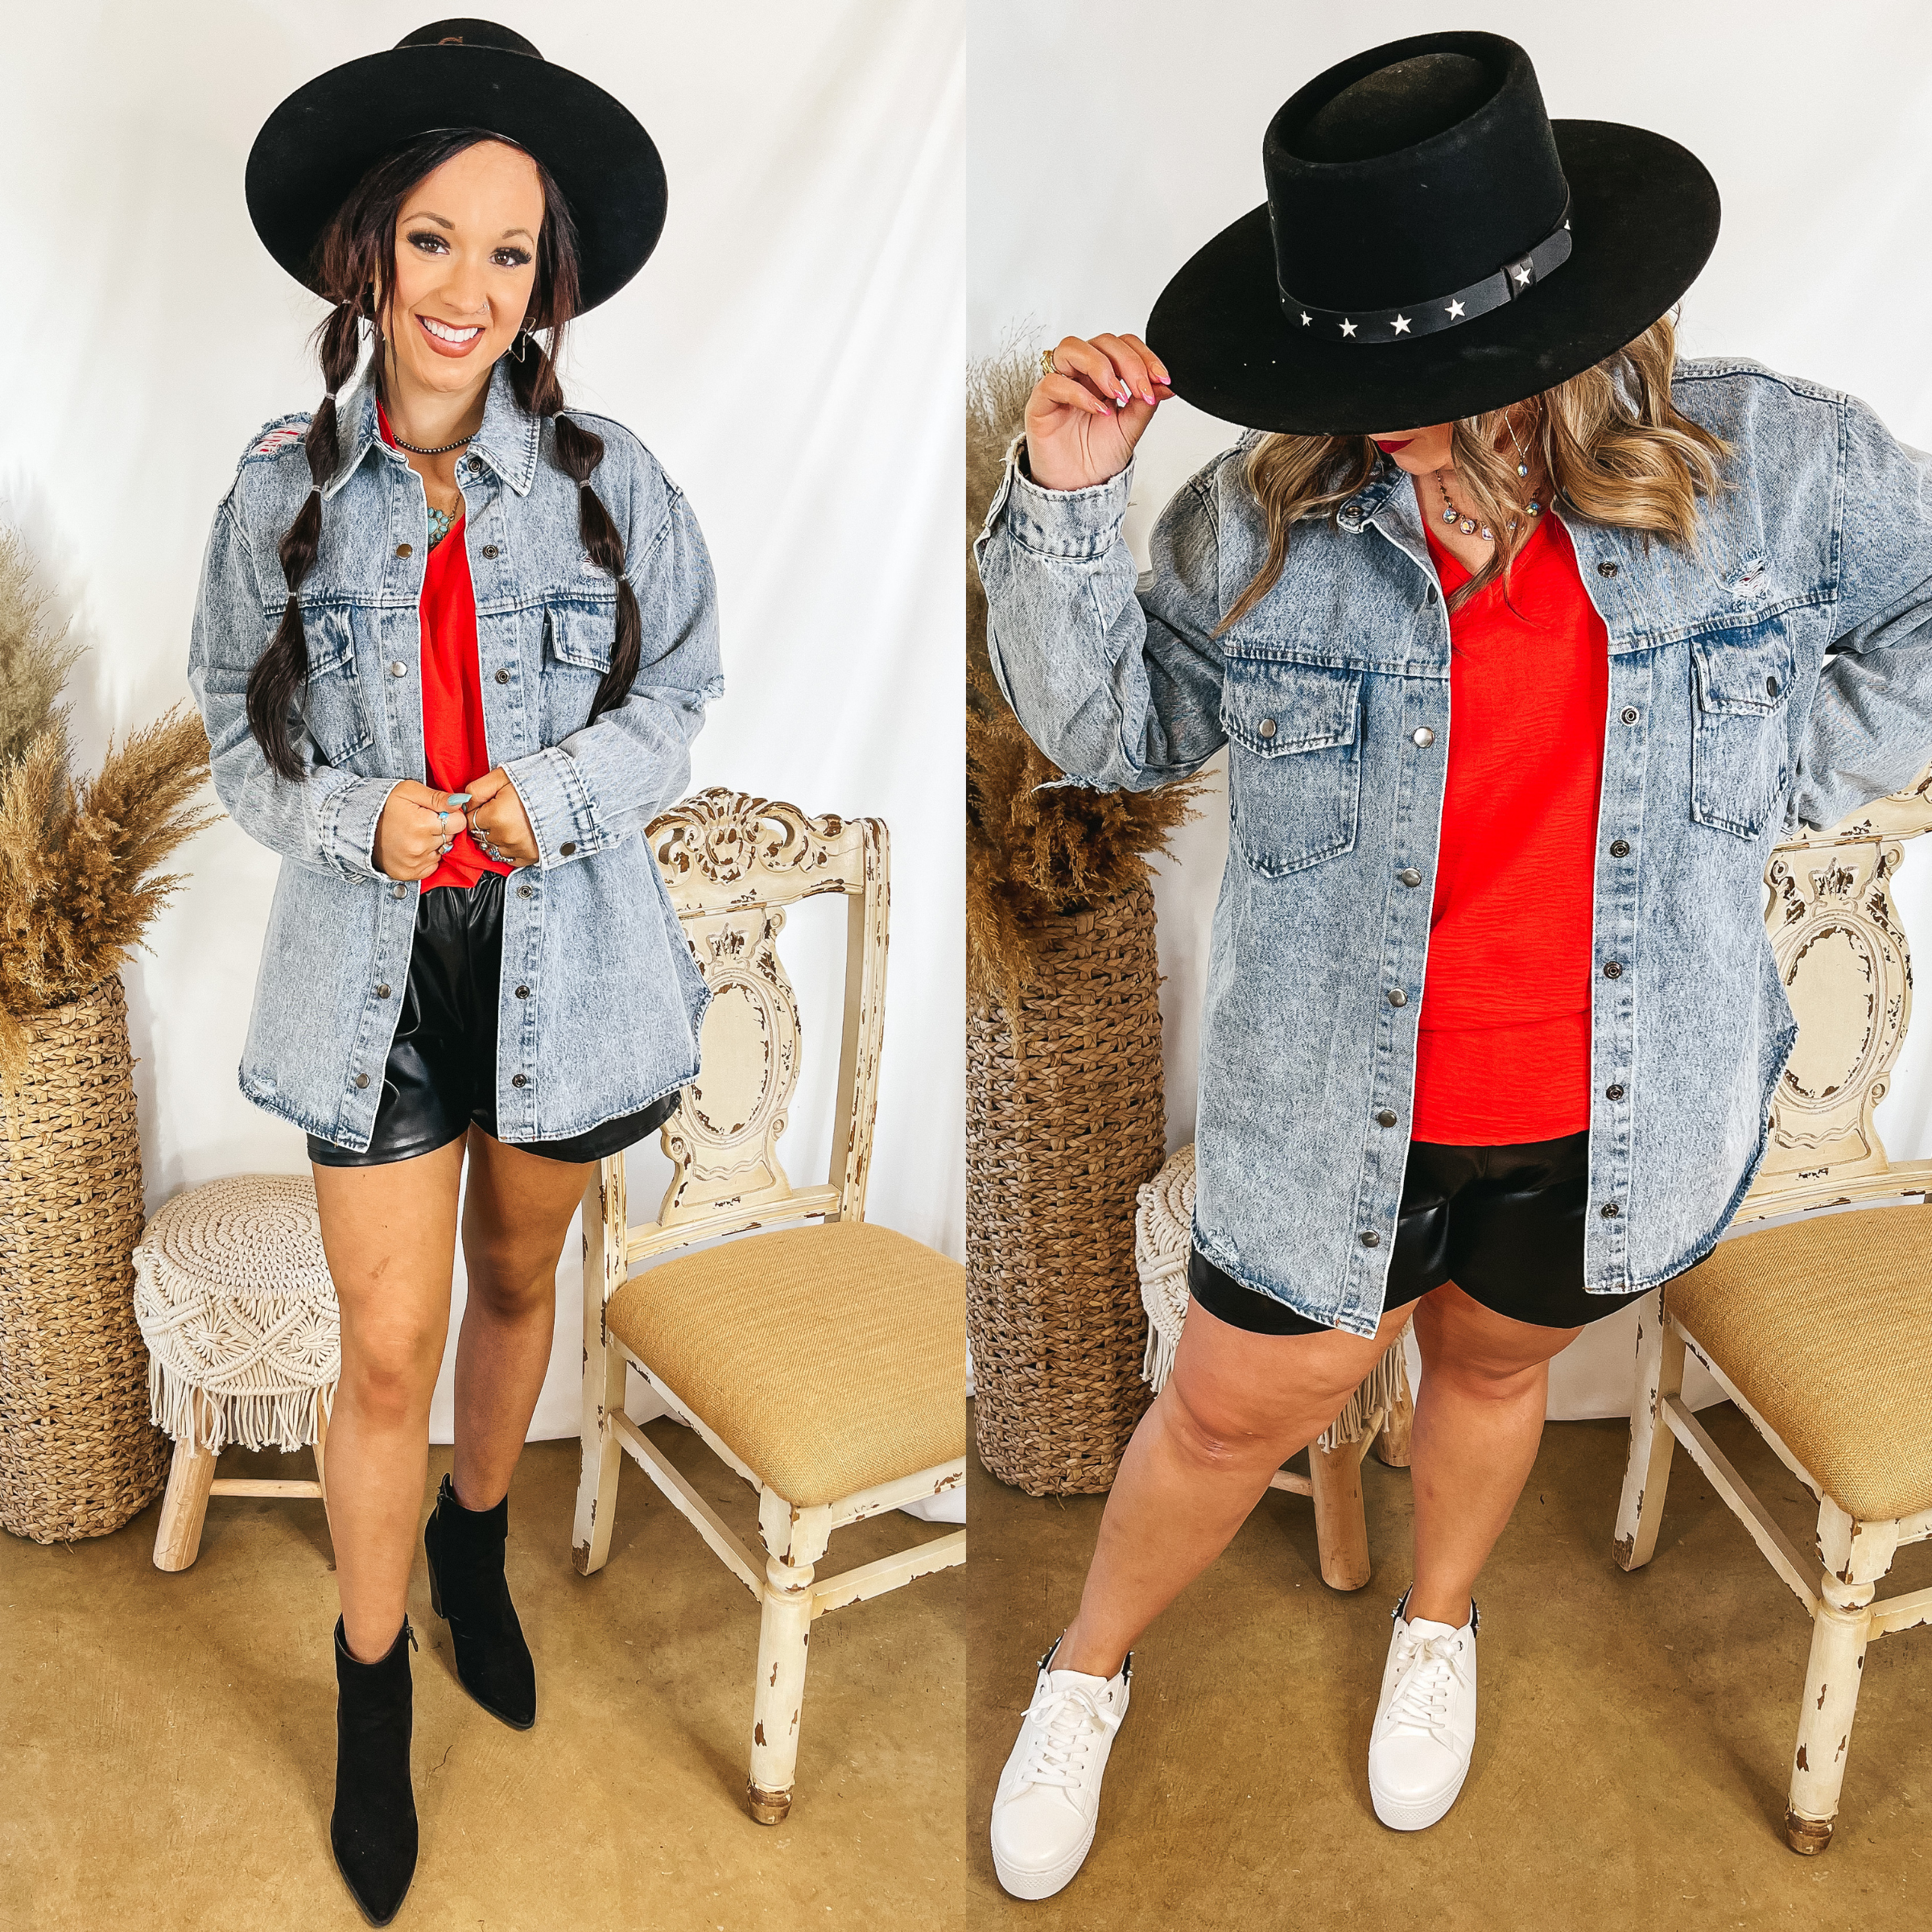 Models are wearing a denim button up shacket that is a light wash. Both models have it paired with black leather shorts, a red top, and a black hat.